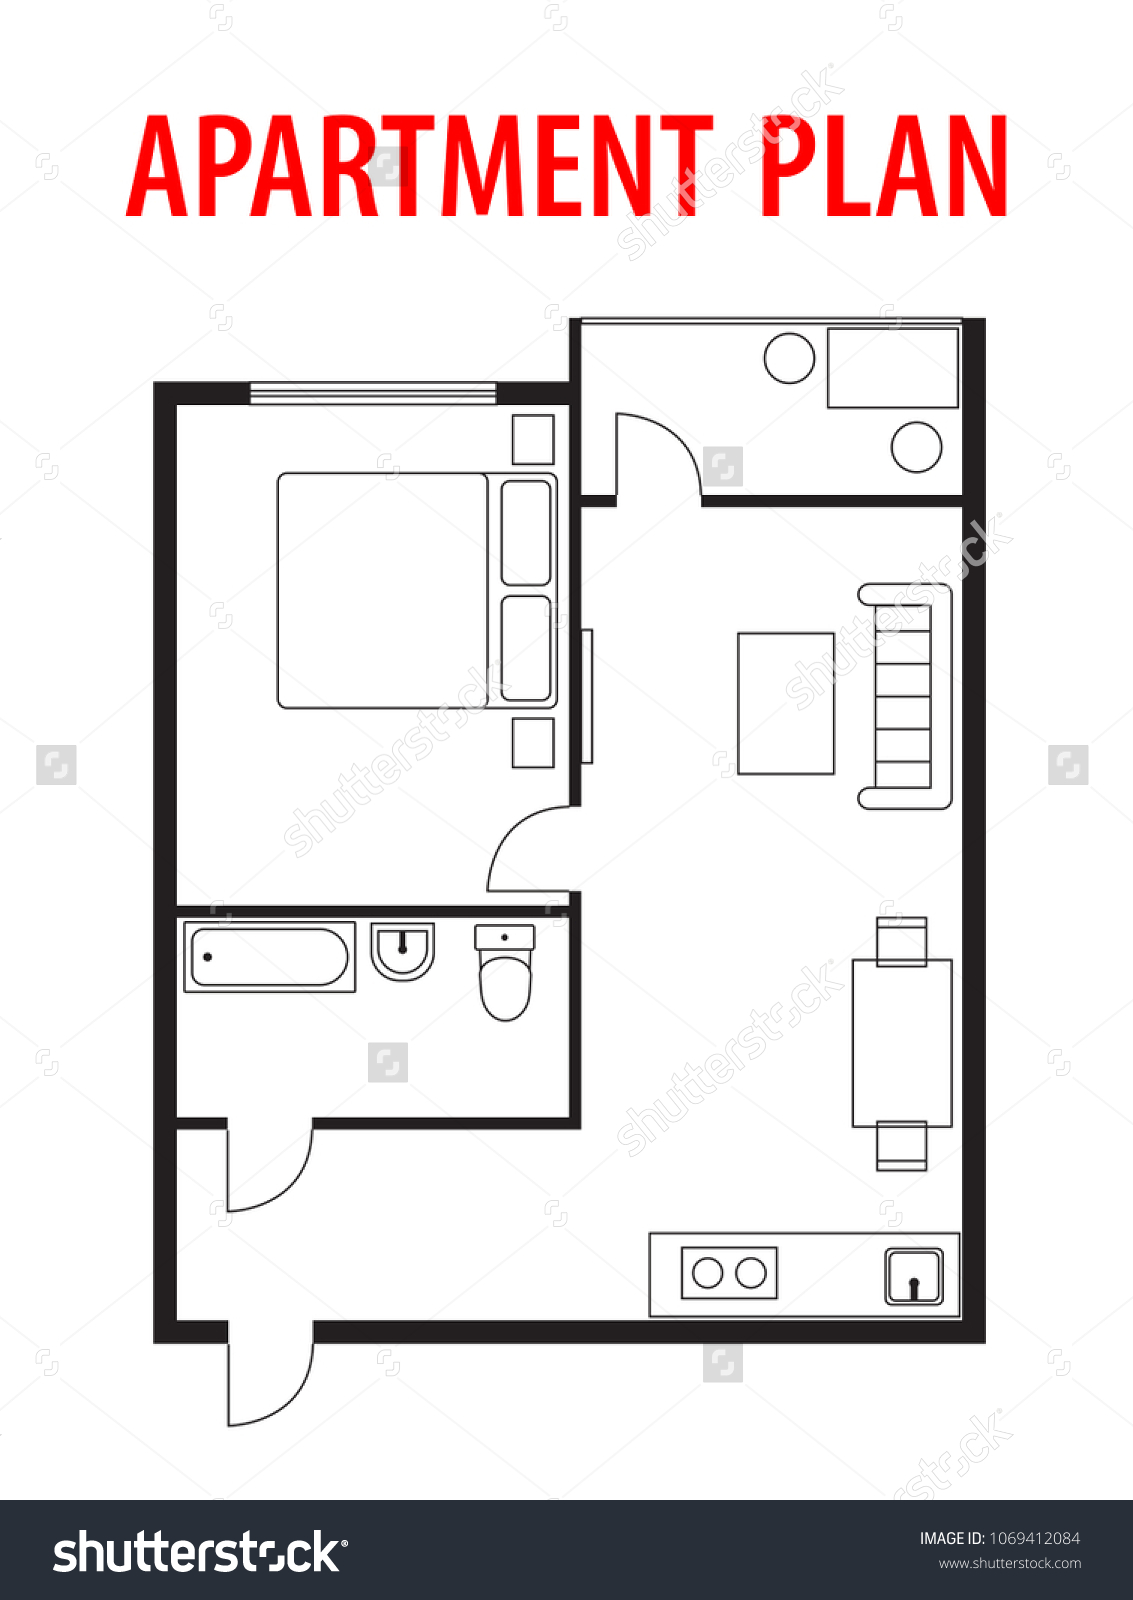 Plan Architectural Project Blueprint Apartment Studio Stock Vector (Royalty  Free) 1069412084